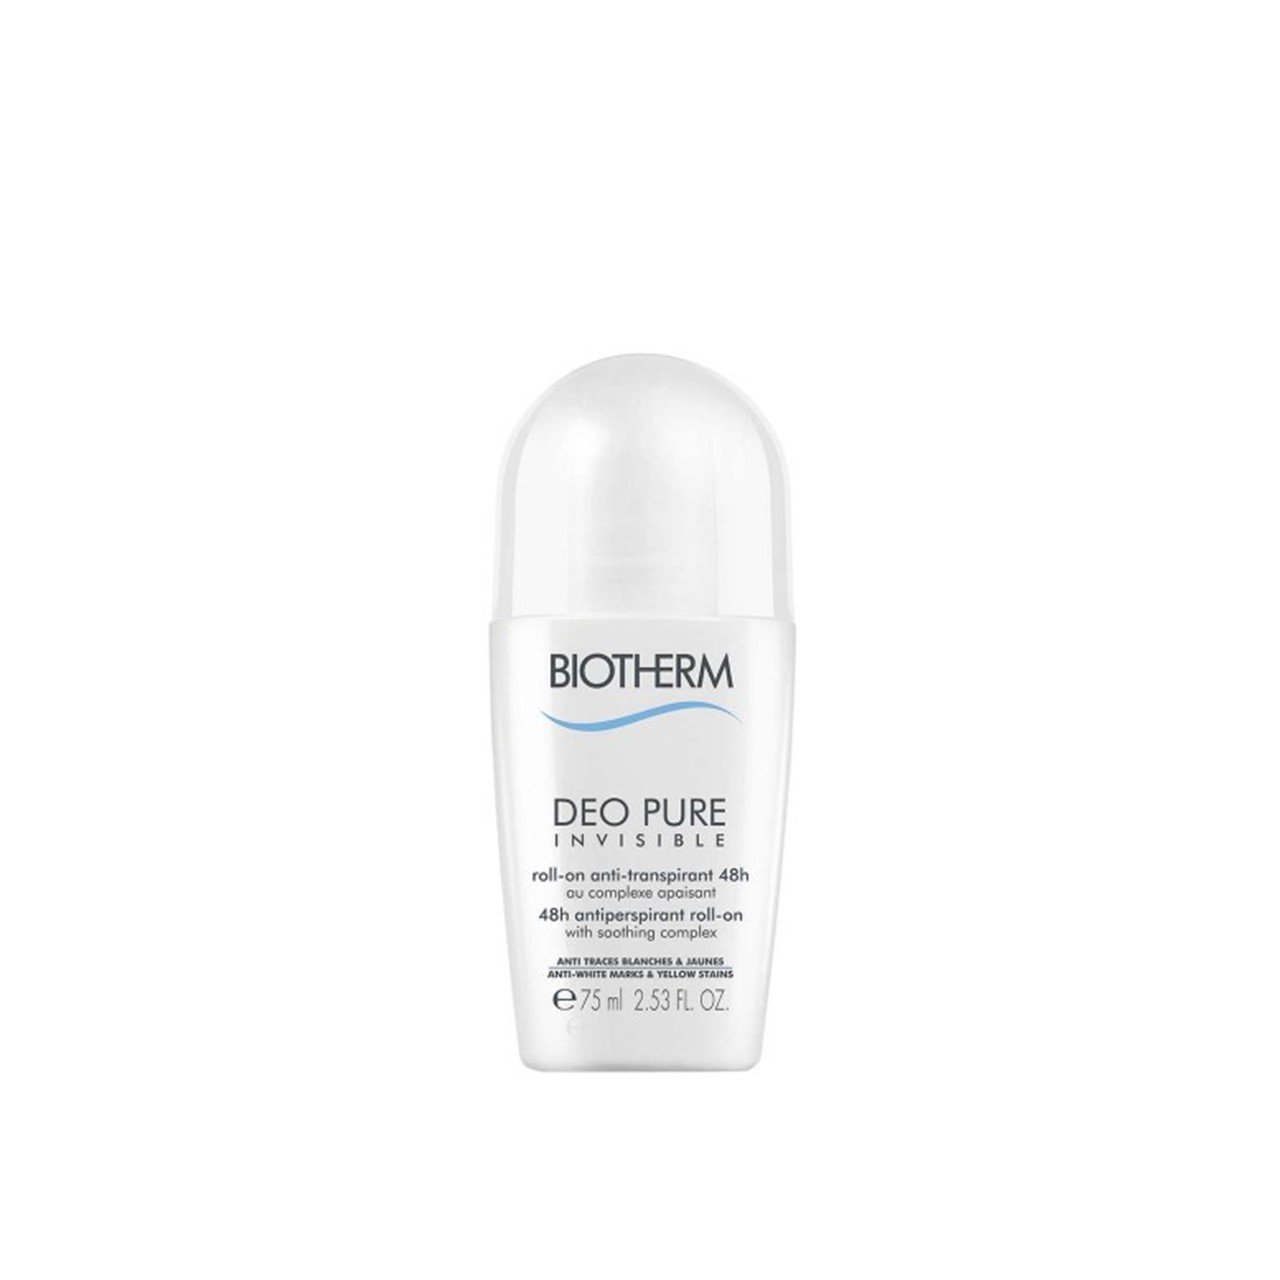 Biotherm Deo Pure Invisible 48h Antiperspirant Roll-On 75ml